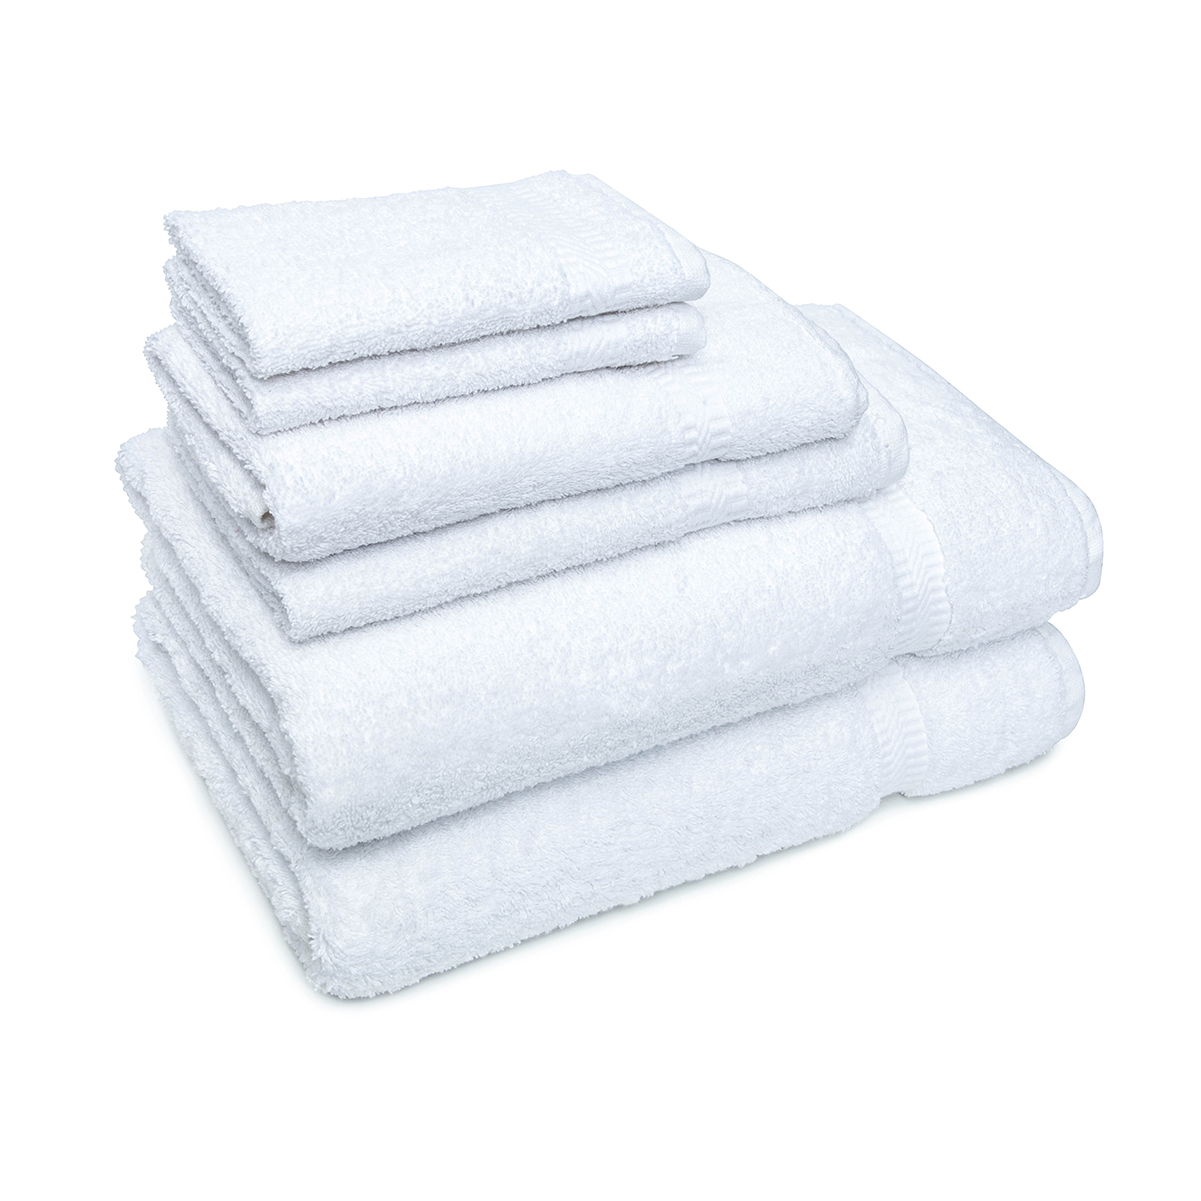 How does ADI sell their Plush Hotel Towels, specifically the white guestroom adi towels?